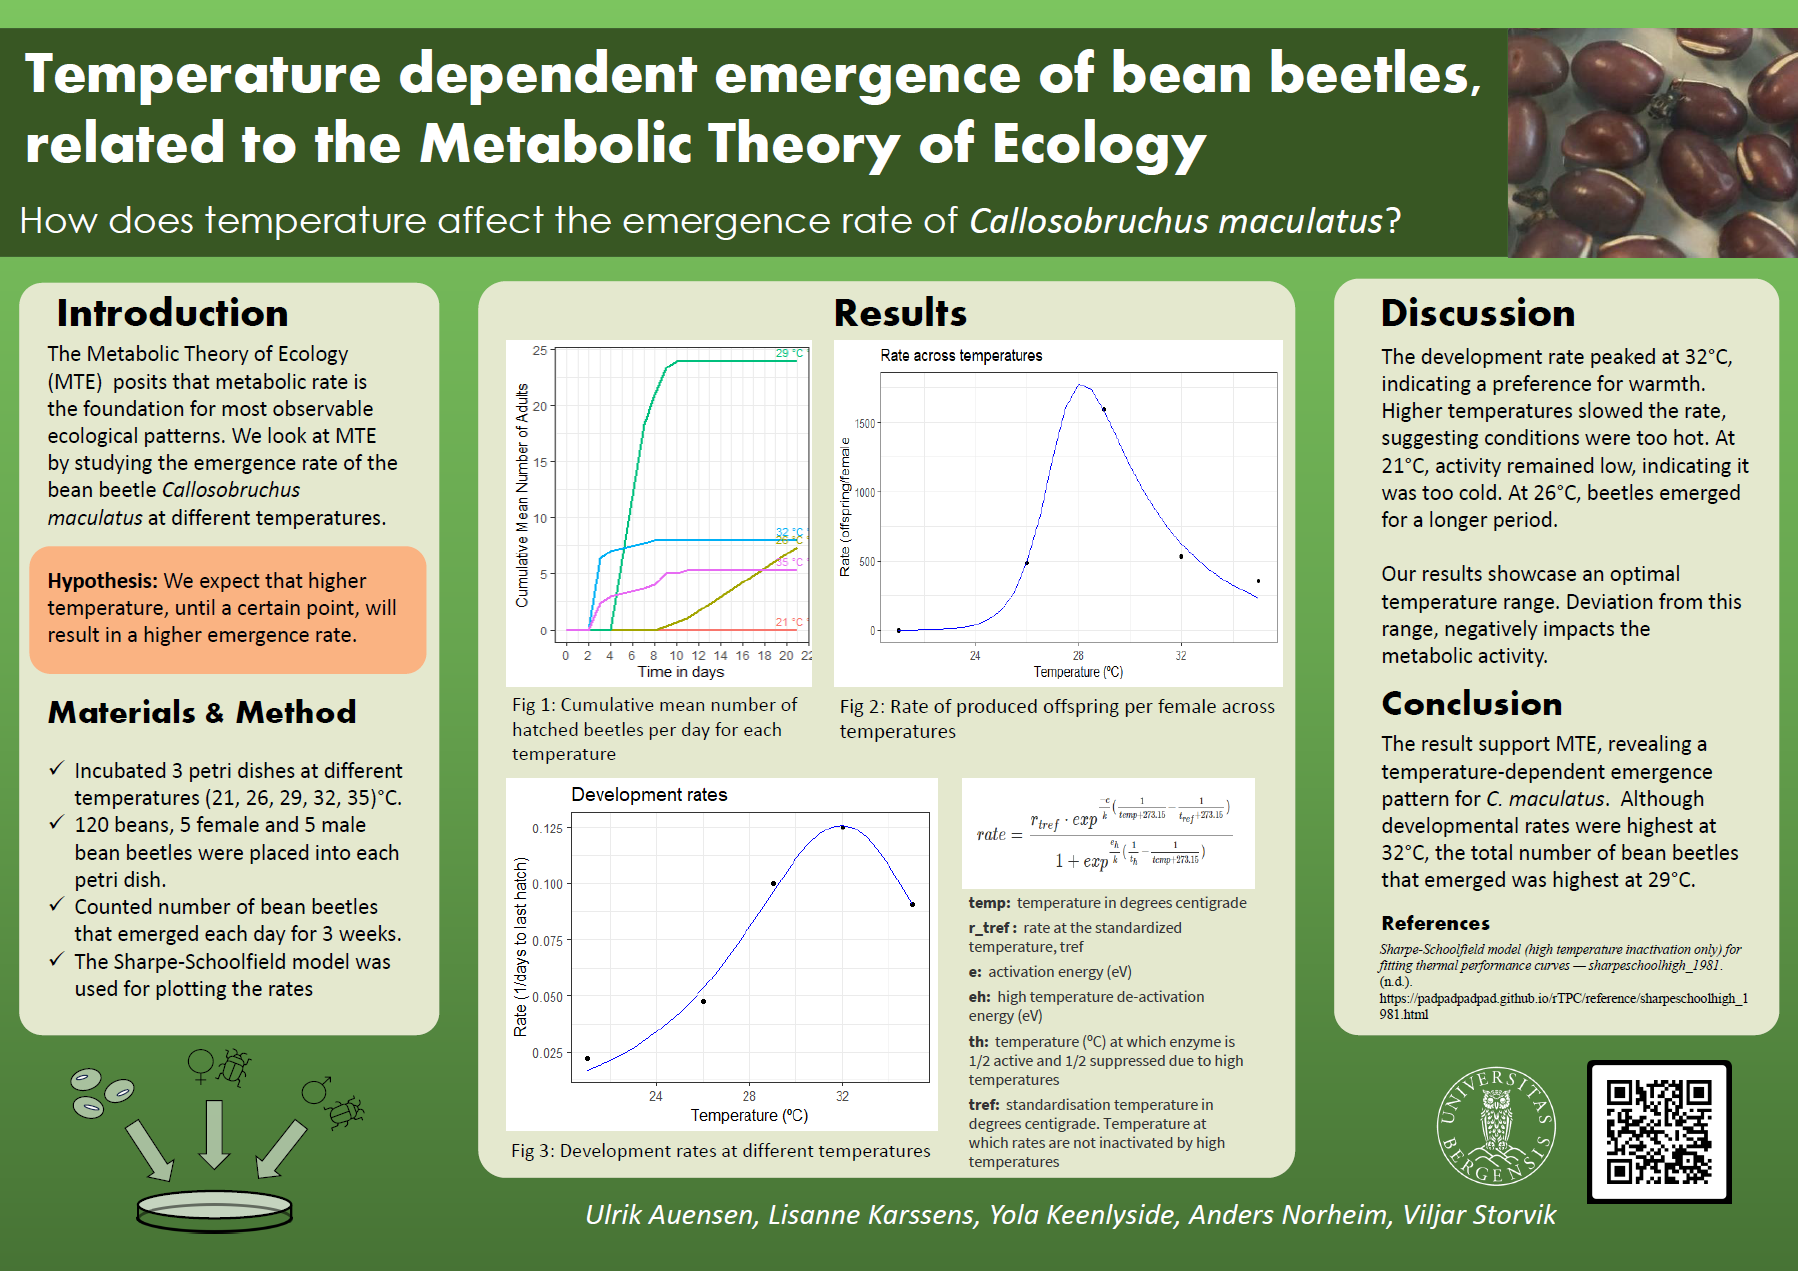 Temperature dependent emergence of bean beetles, related to the Metabolic Theory of Ecology